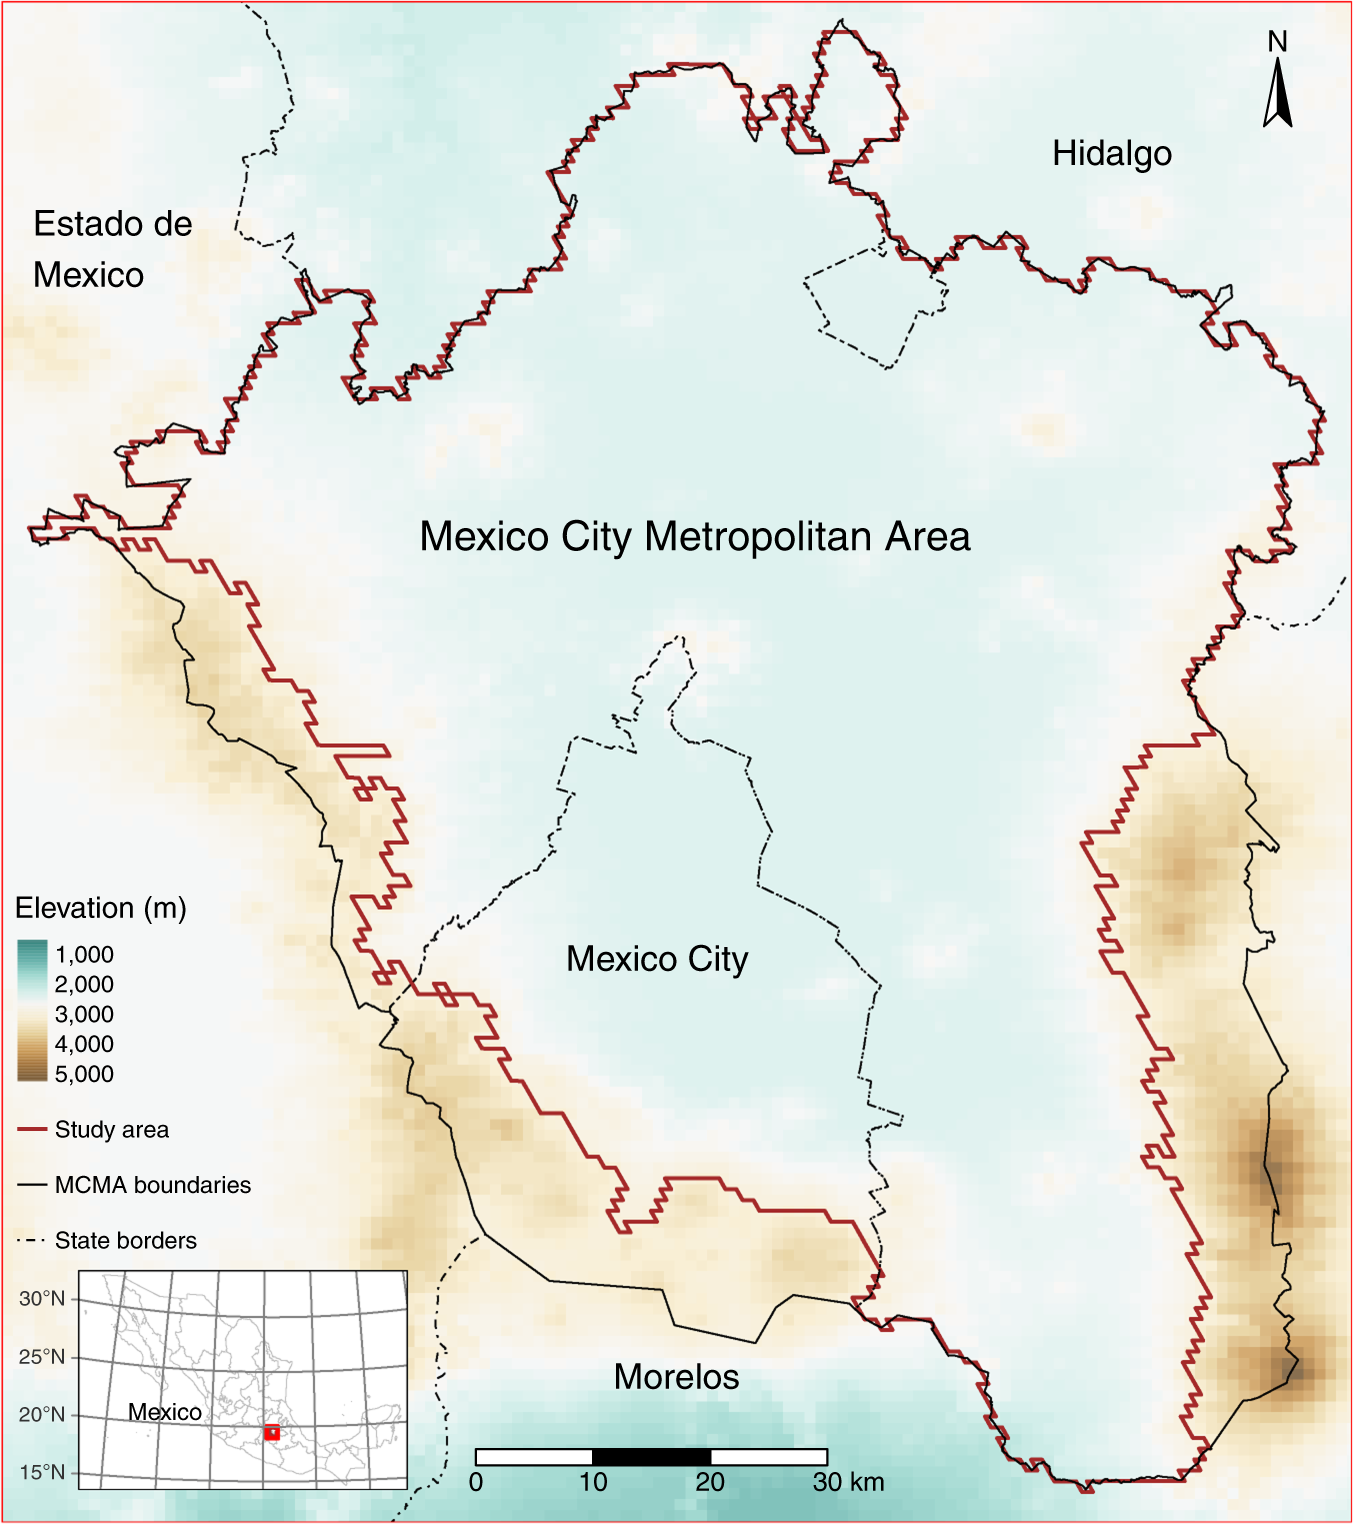 Prediction Of Daily Mean And One Hour Maximum Pm2 5 Concentrations And Applications In Central Mexico Using Satellite Based Machine Learning Models Journal Of Exposure Science Environmental Epidemiology